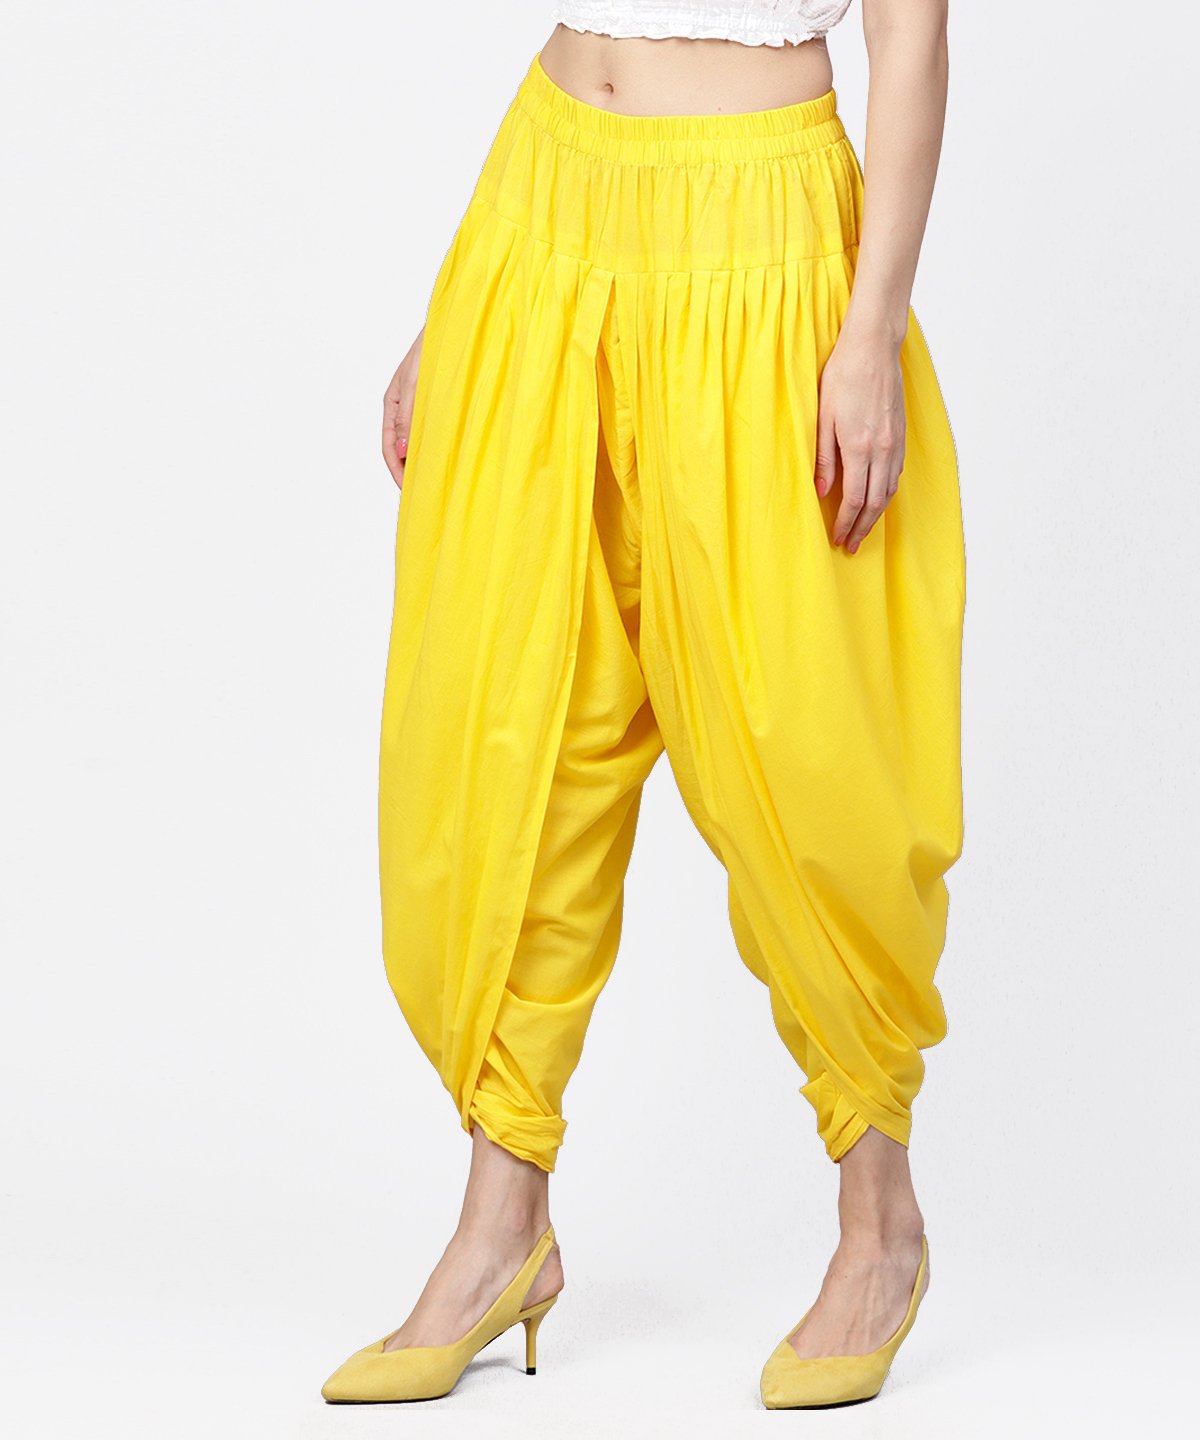 Women's Solid Yellow Ankle Length Cotton Dhoti Pant - Nayo Clothing